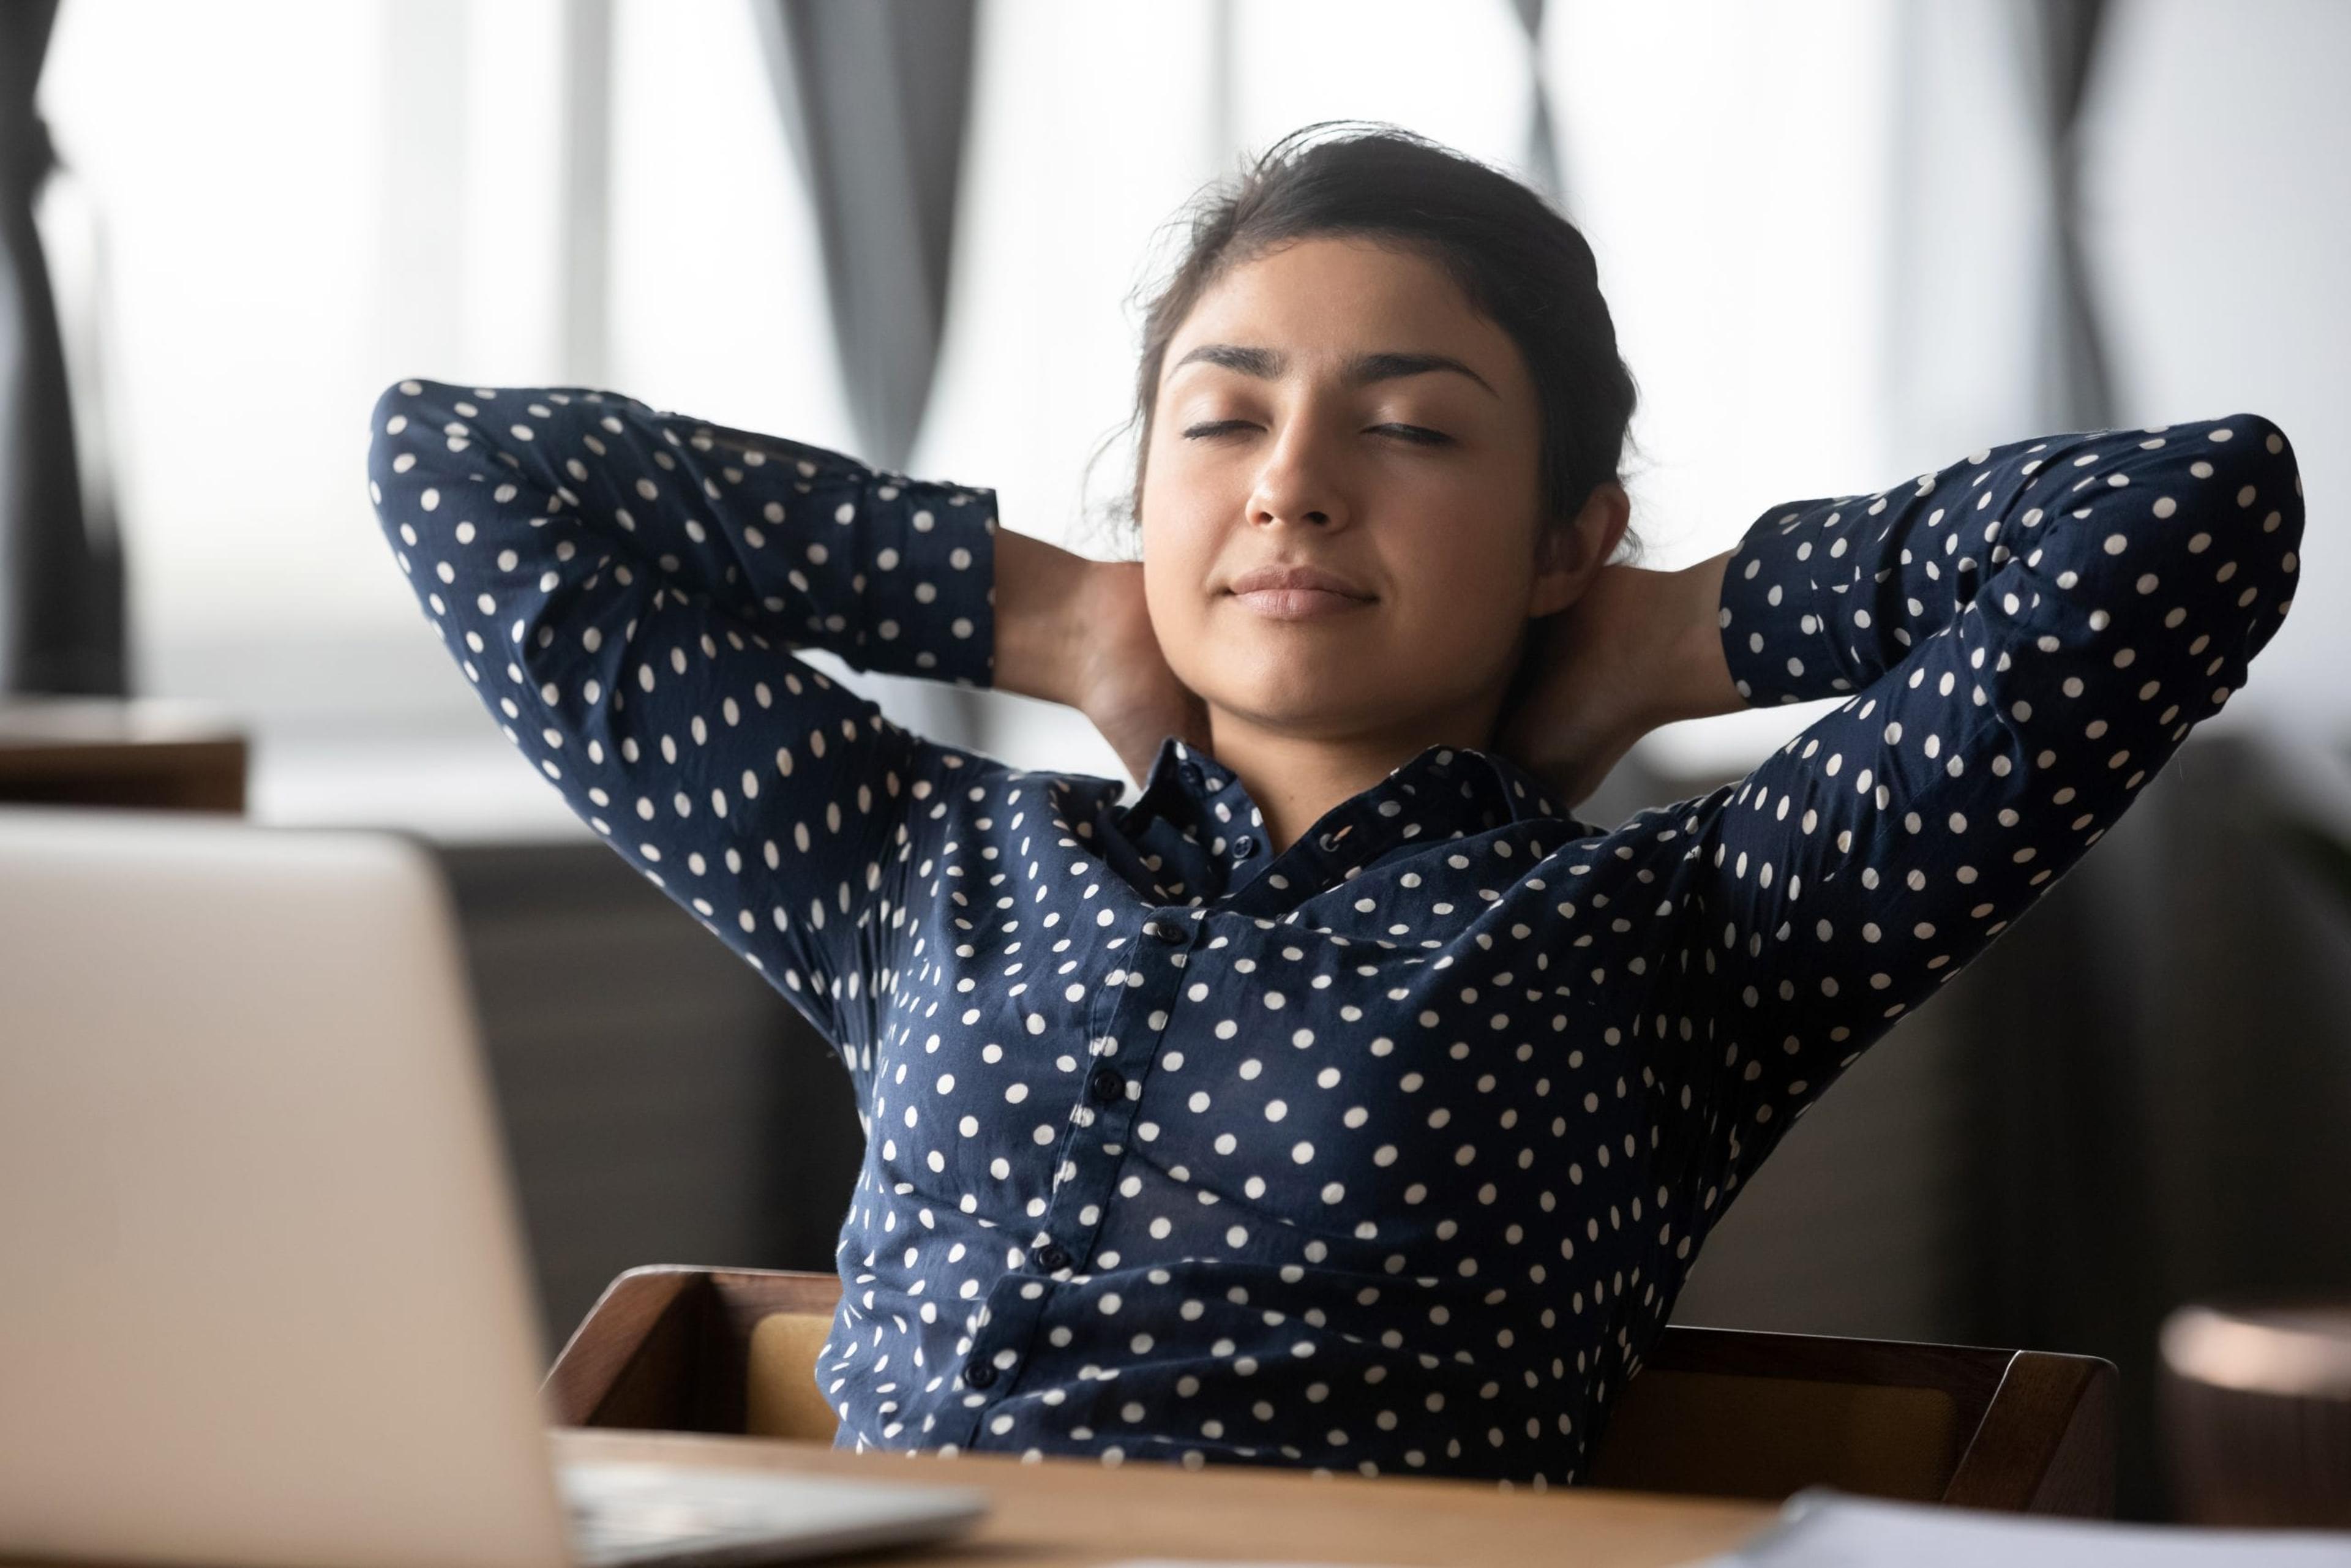 Calm tired ethnic young woman sit lean back in chair at workplace relax with eyes closed take nap, exhausted millennial Indian girl rest at desk daydreaming or sleeping at home, fatigue concept